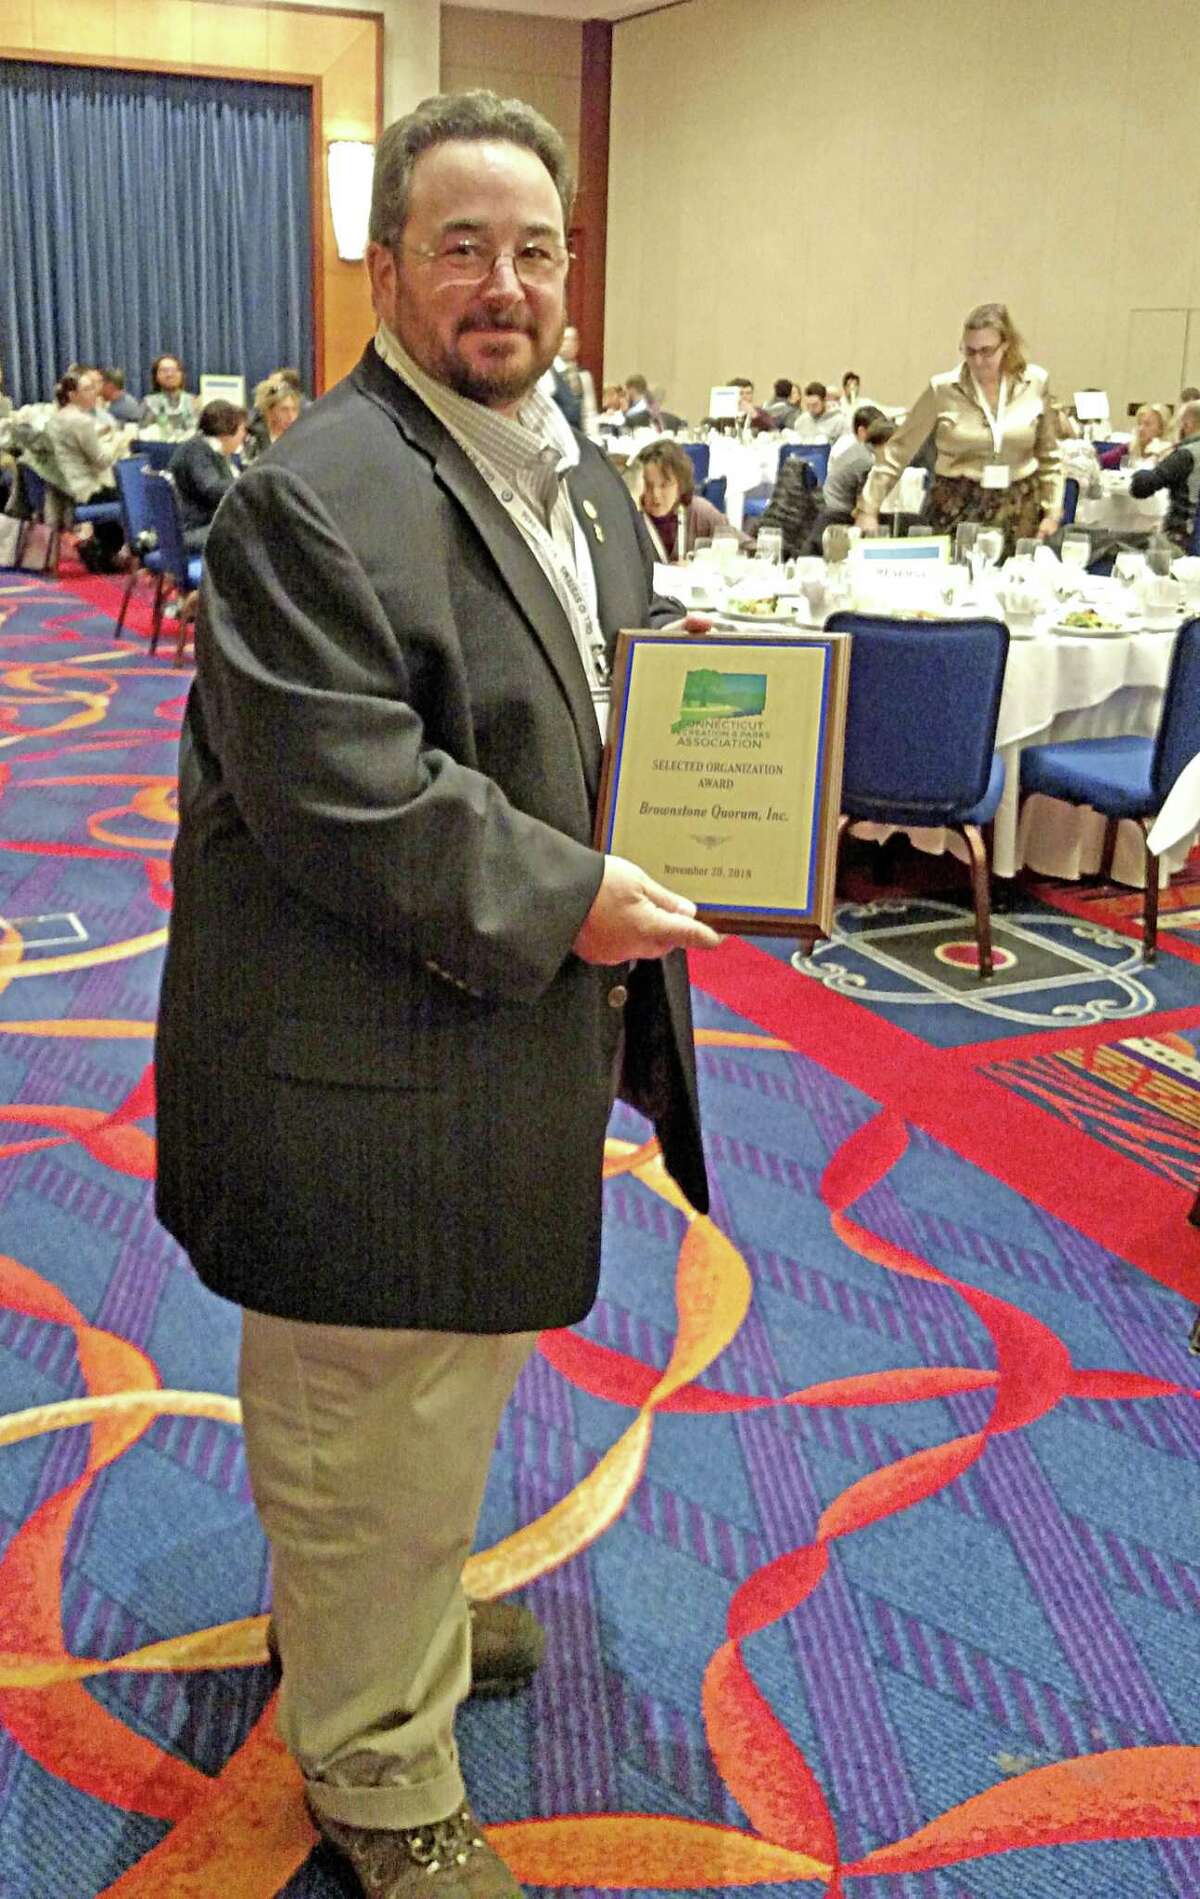 Jim Tripp, president of the Brownstone Quorum of Portland, recently received an award from The Connecticut Recreation and Parks Association for his leadership of Riverfront Park.